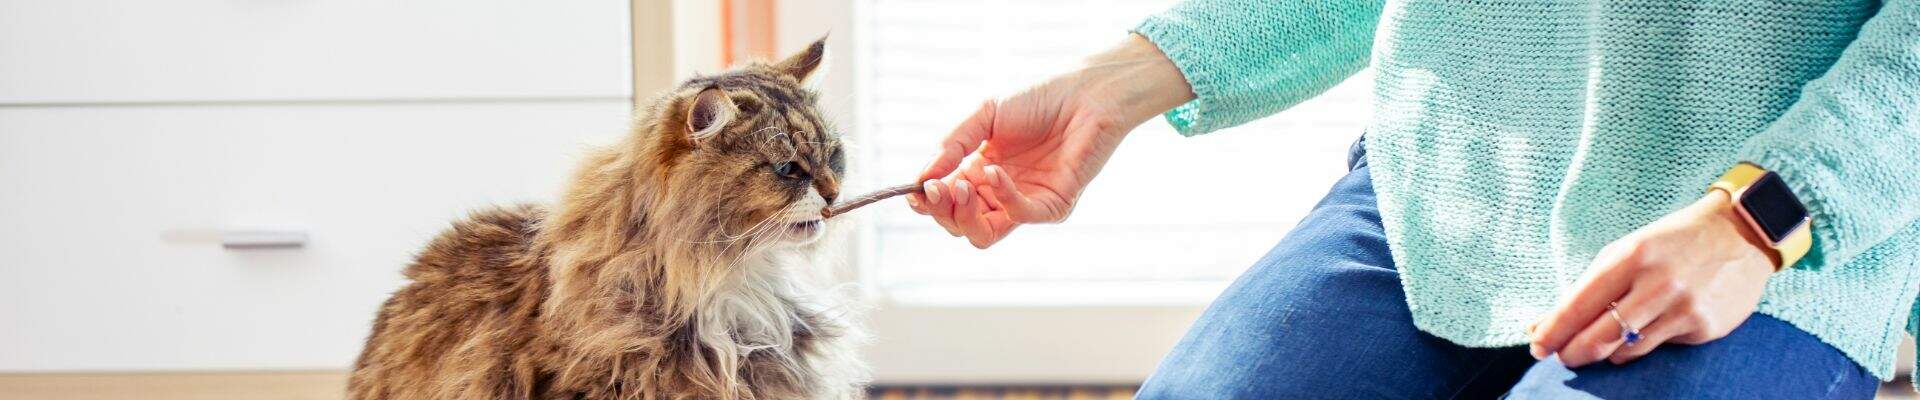 A cat eating a treat out of its owner's hand